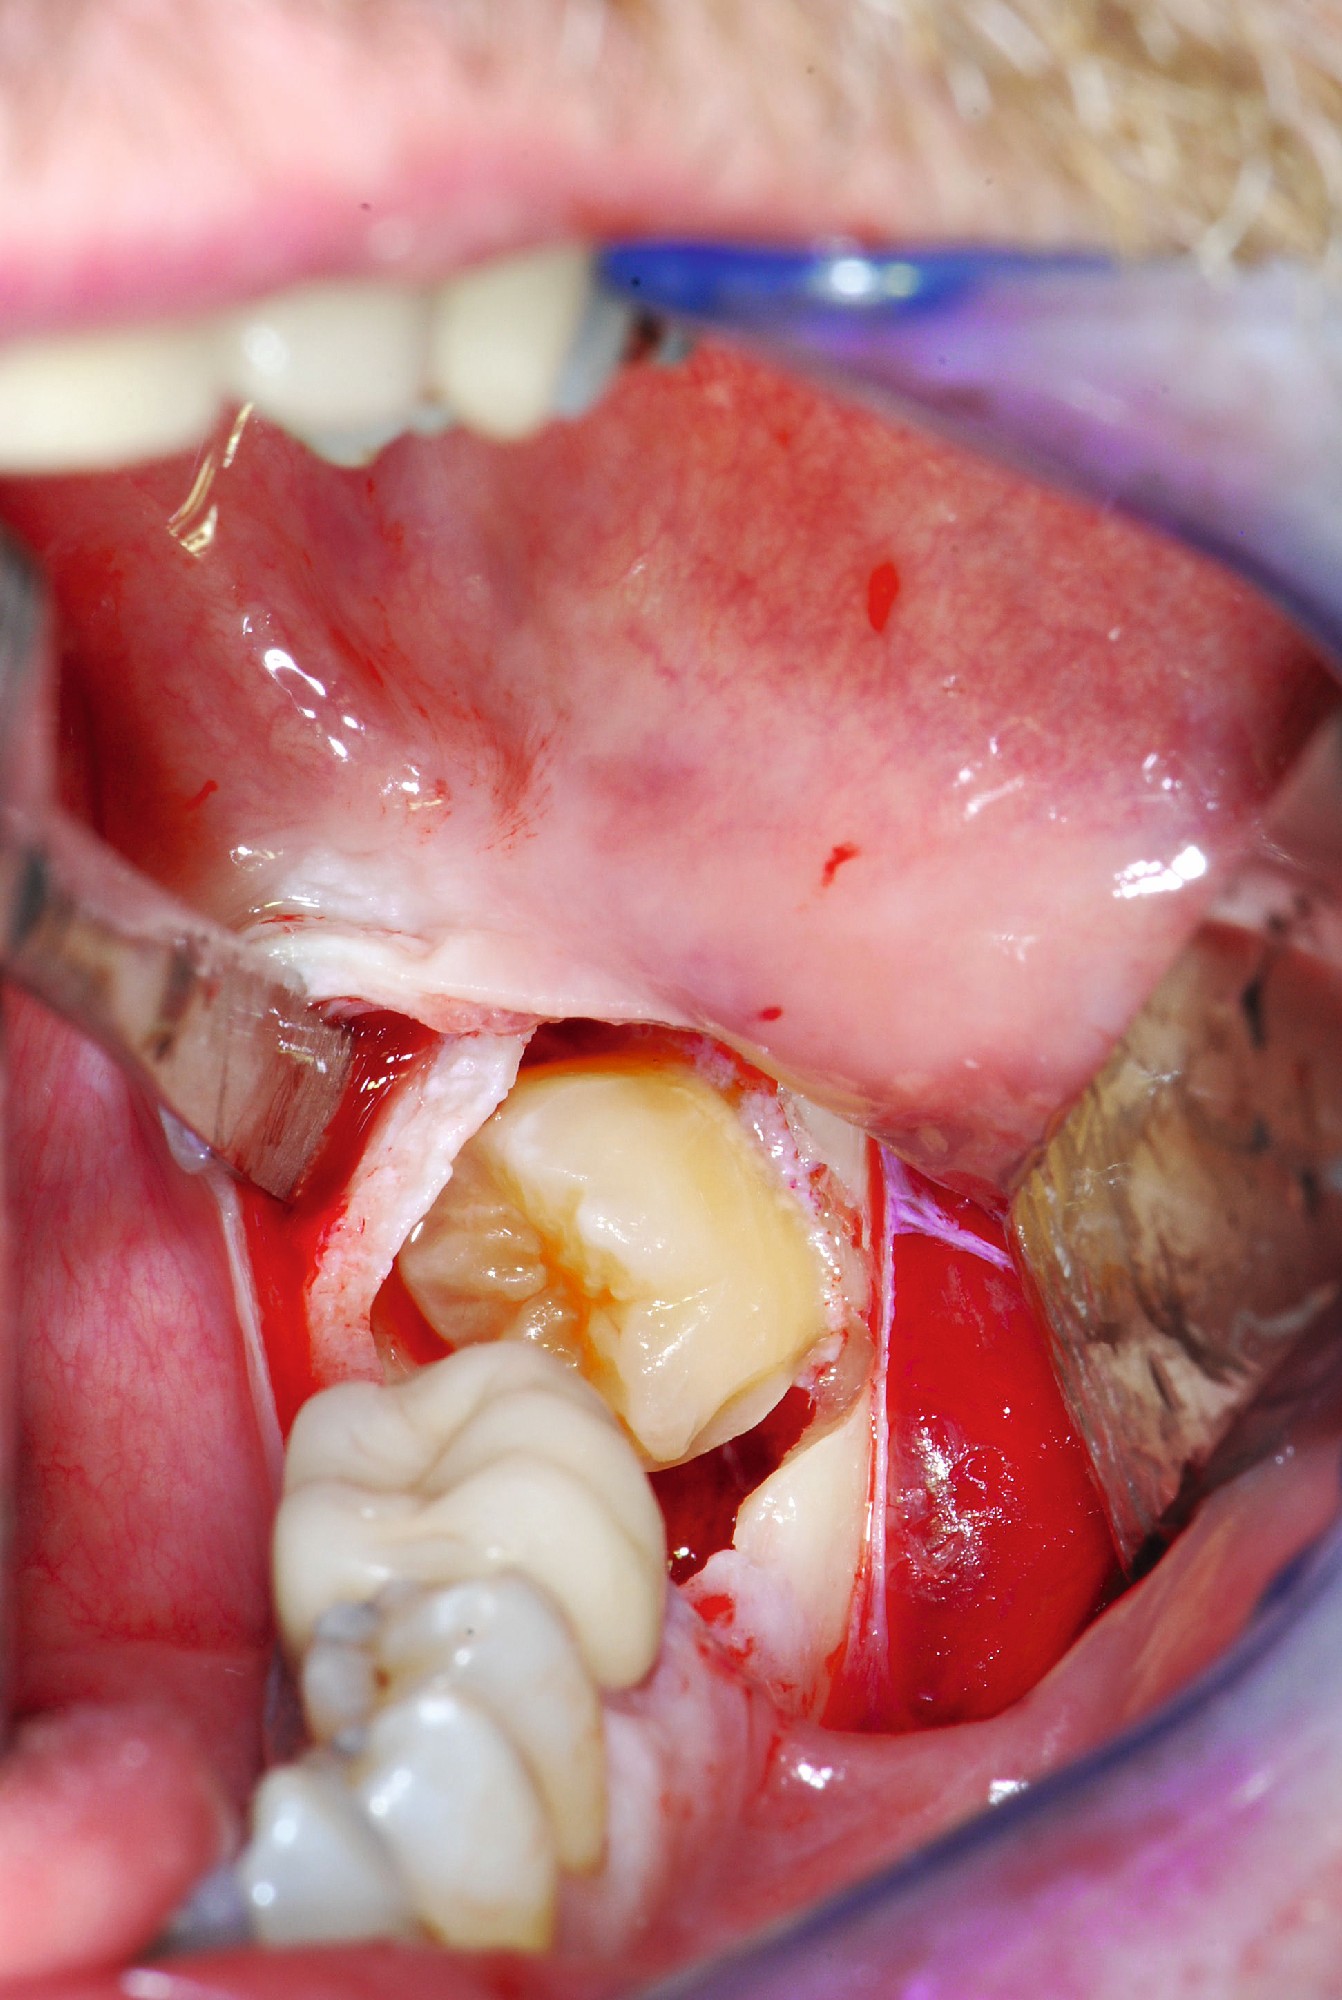 Surgical removal of wisdom teeth - Online DZZ